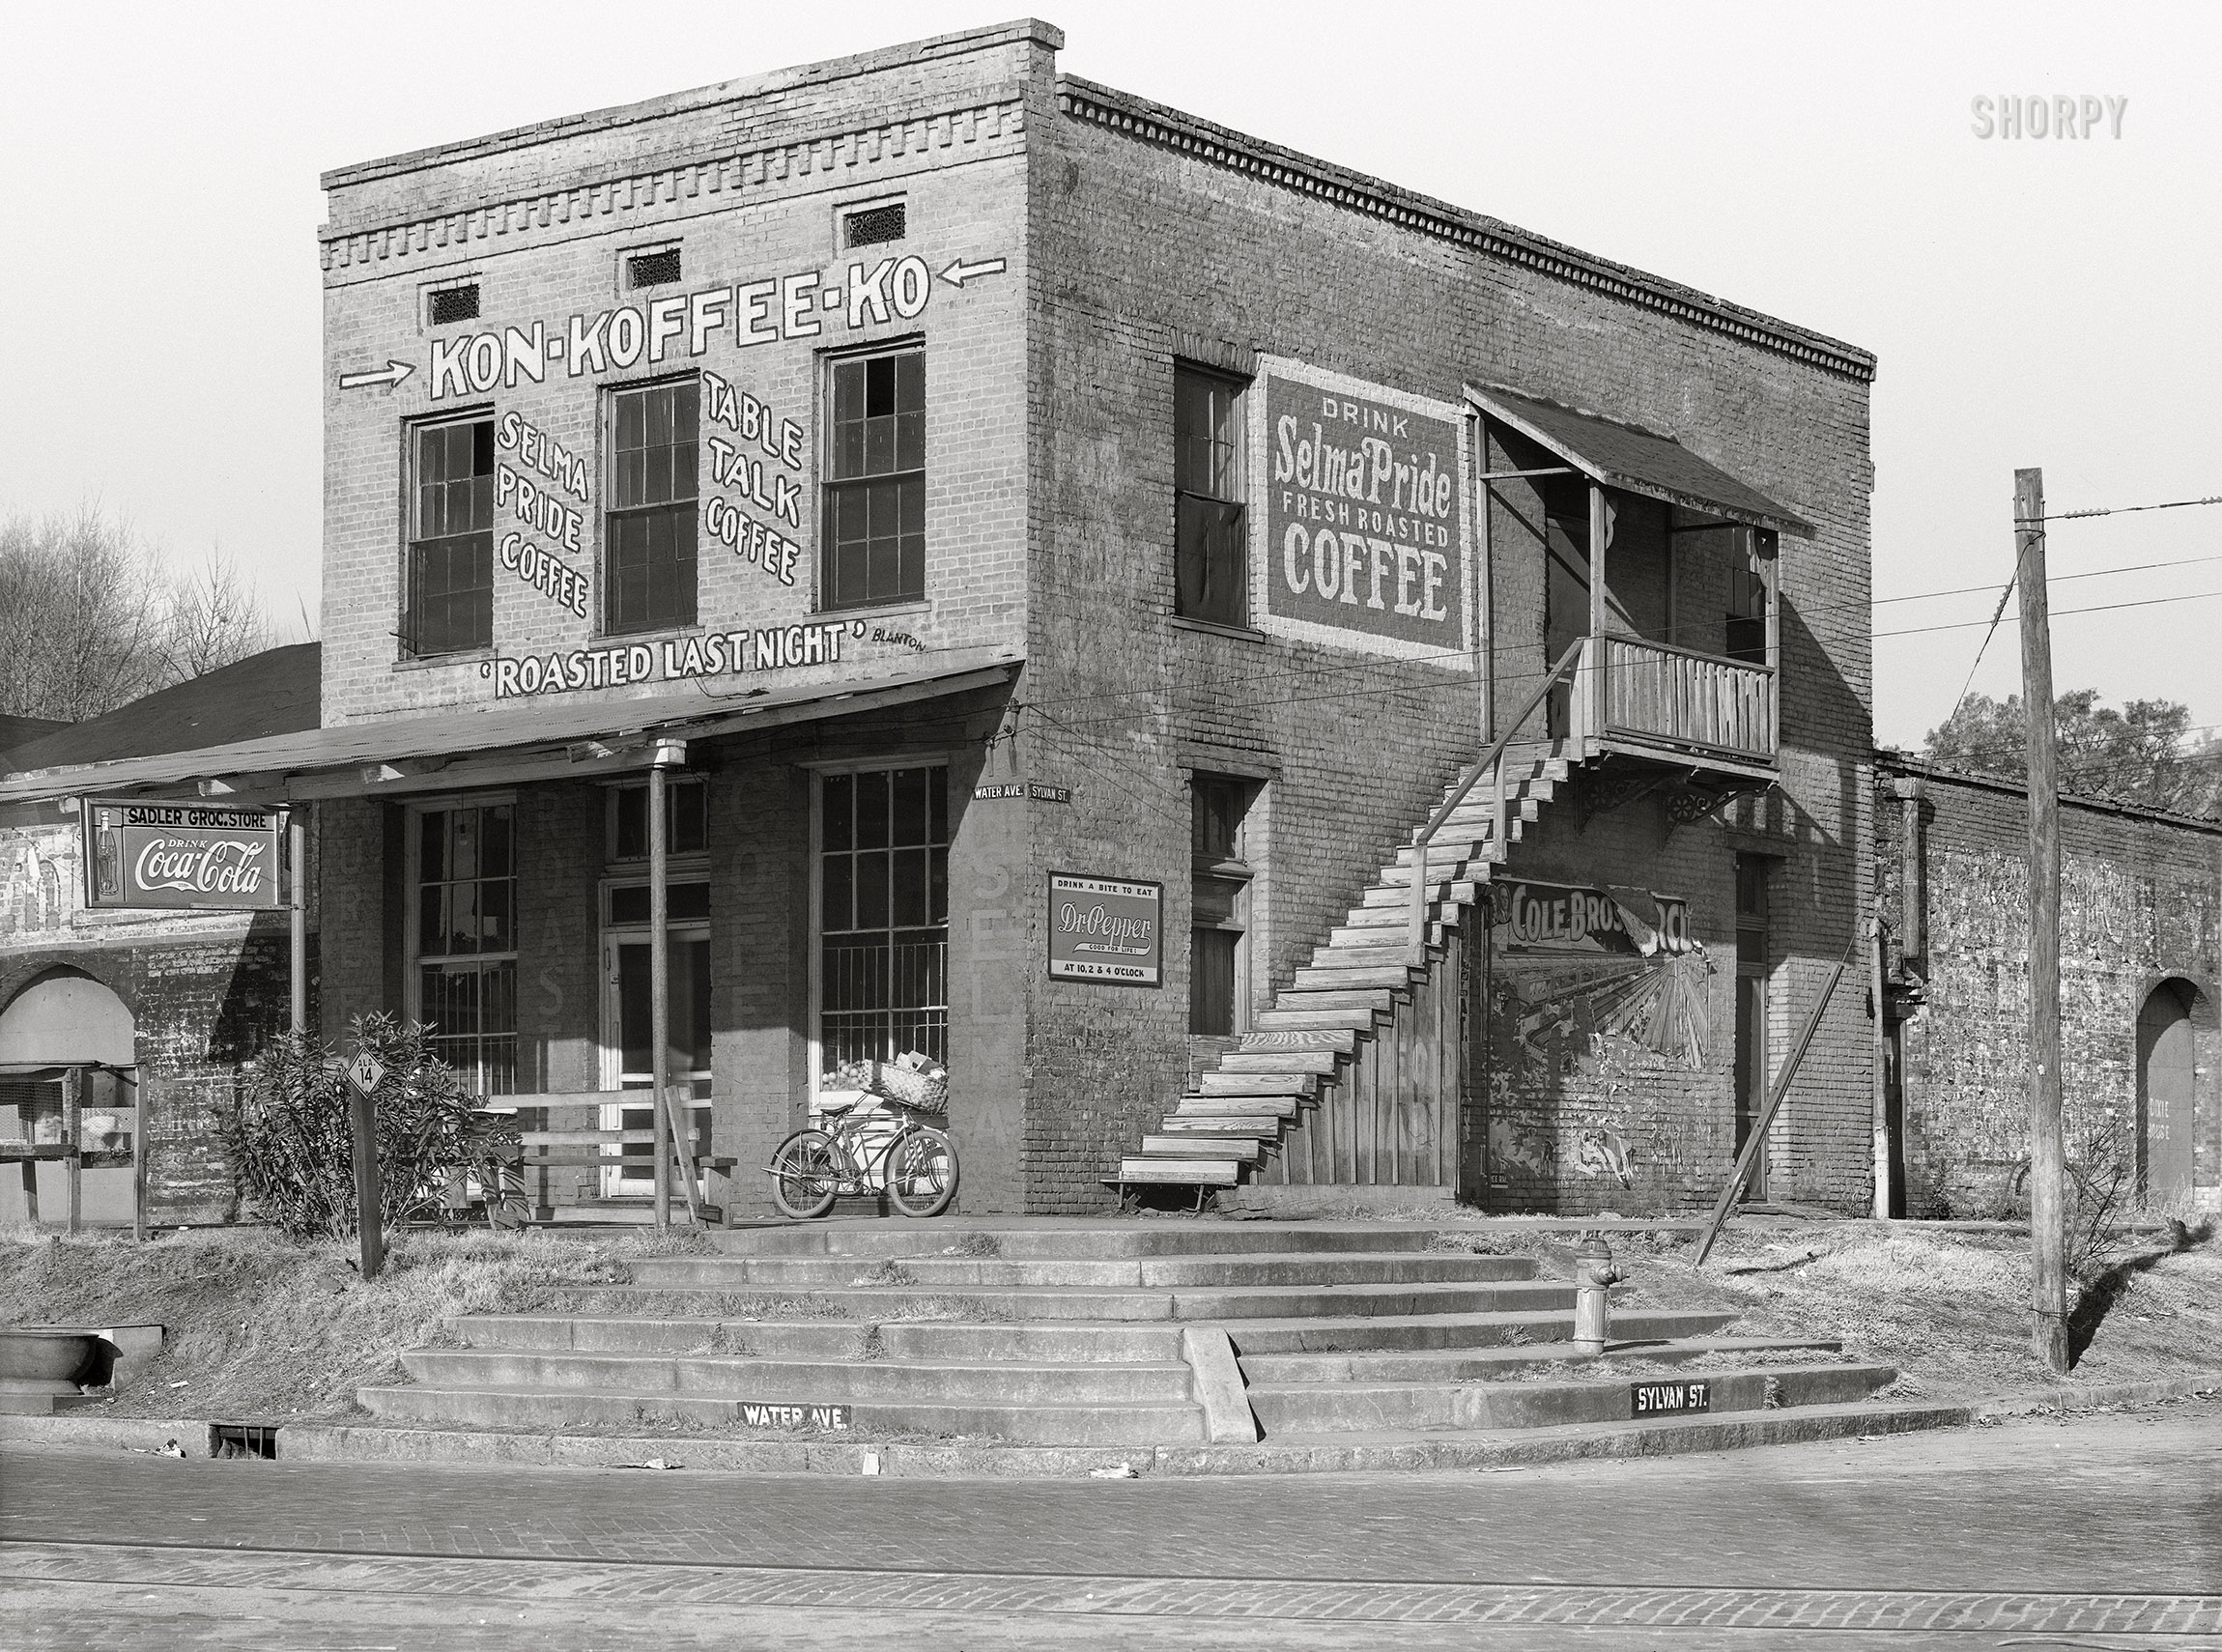 December 1935. "Coffee house in Selma, Alabama." The Sadler Grocery Store, purveyor of Kon-Koffee-Kompany's Table Talk and Selma Pride ("Roasted Last Night") as well as Coca-Cola and Dr. Pepper. Nitrate negative by Walker Evans for the Resettlement Admin. View full size.